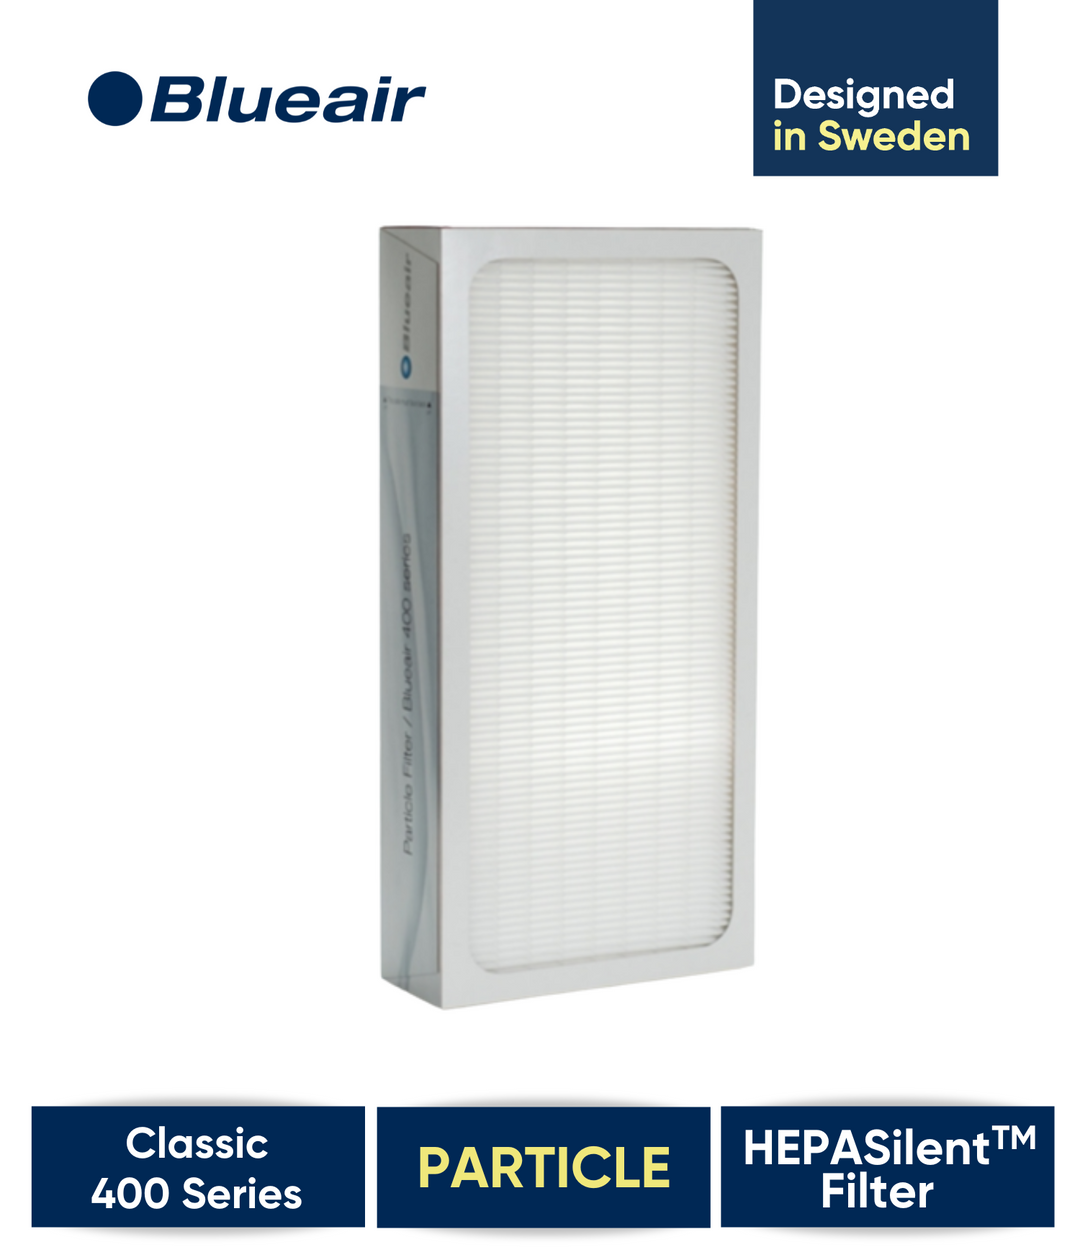 Blueair Classic 400 Series Particle Filter